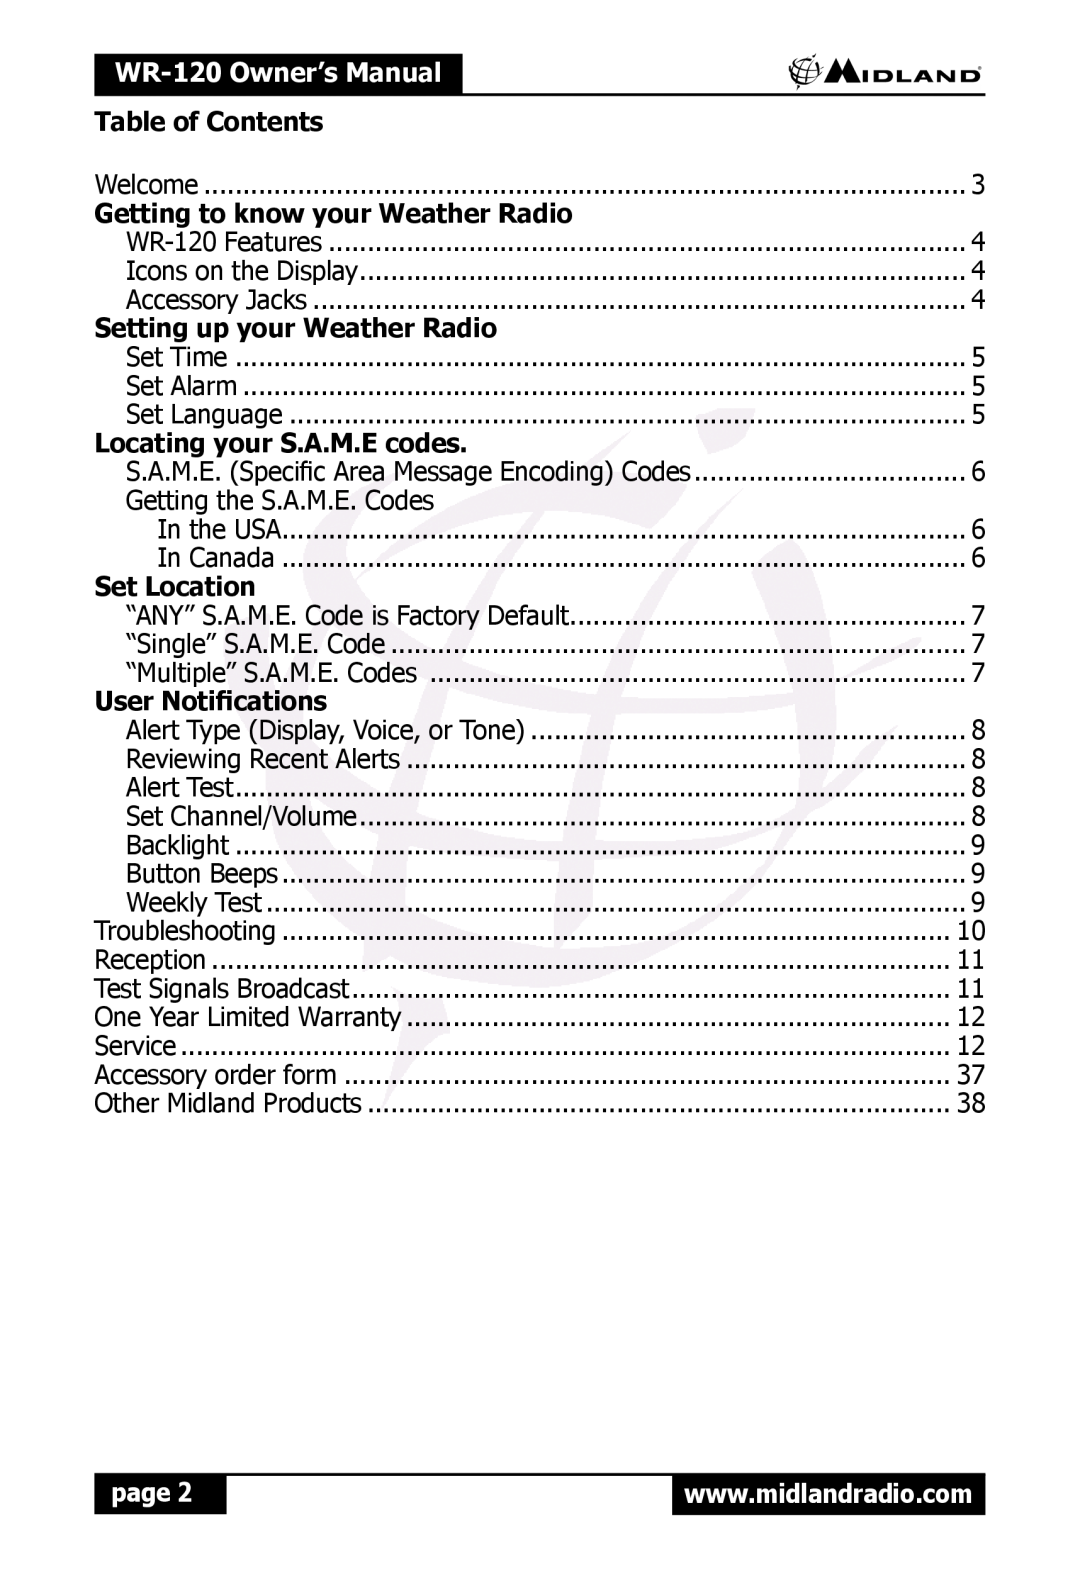 Midland Radio WR120 WR-120Owner’s Manual, Table of Contents, Getting to know your Weather Radio, Set Location, page 